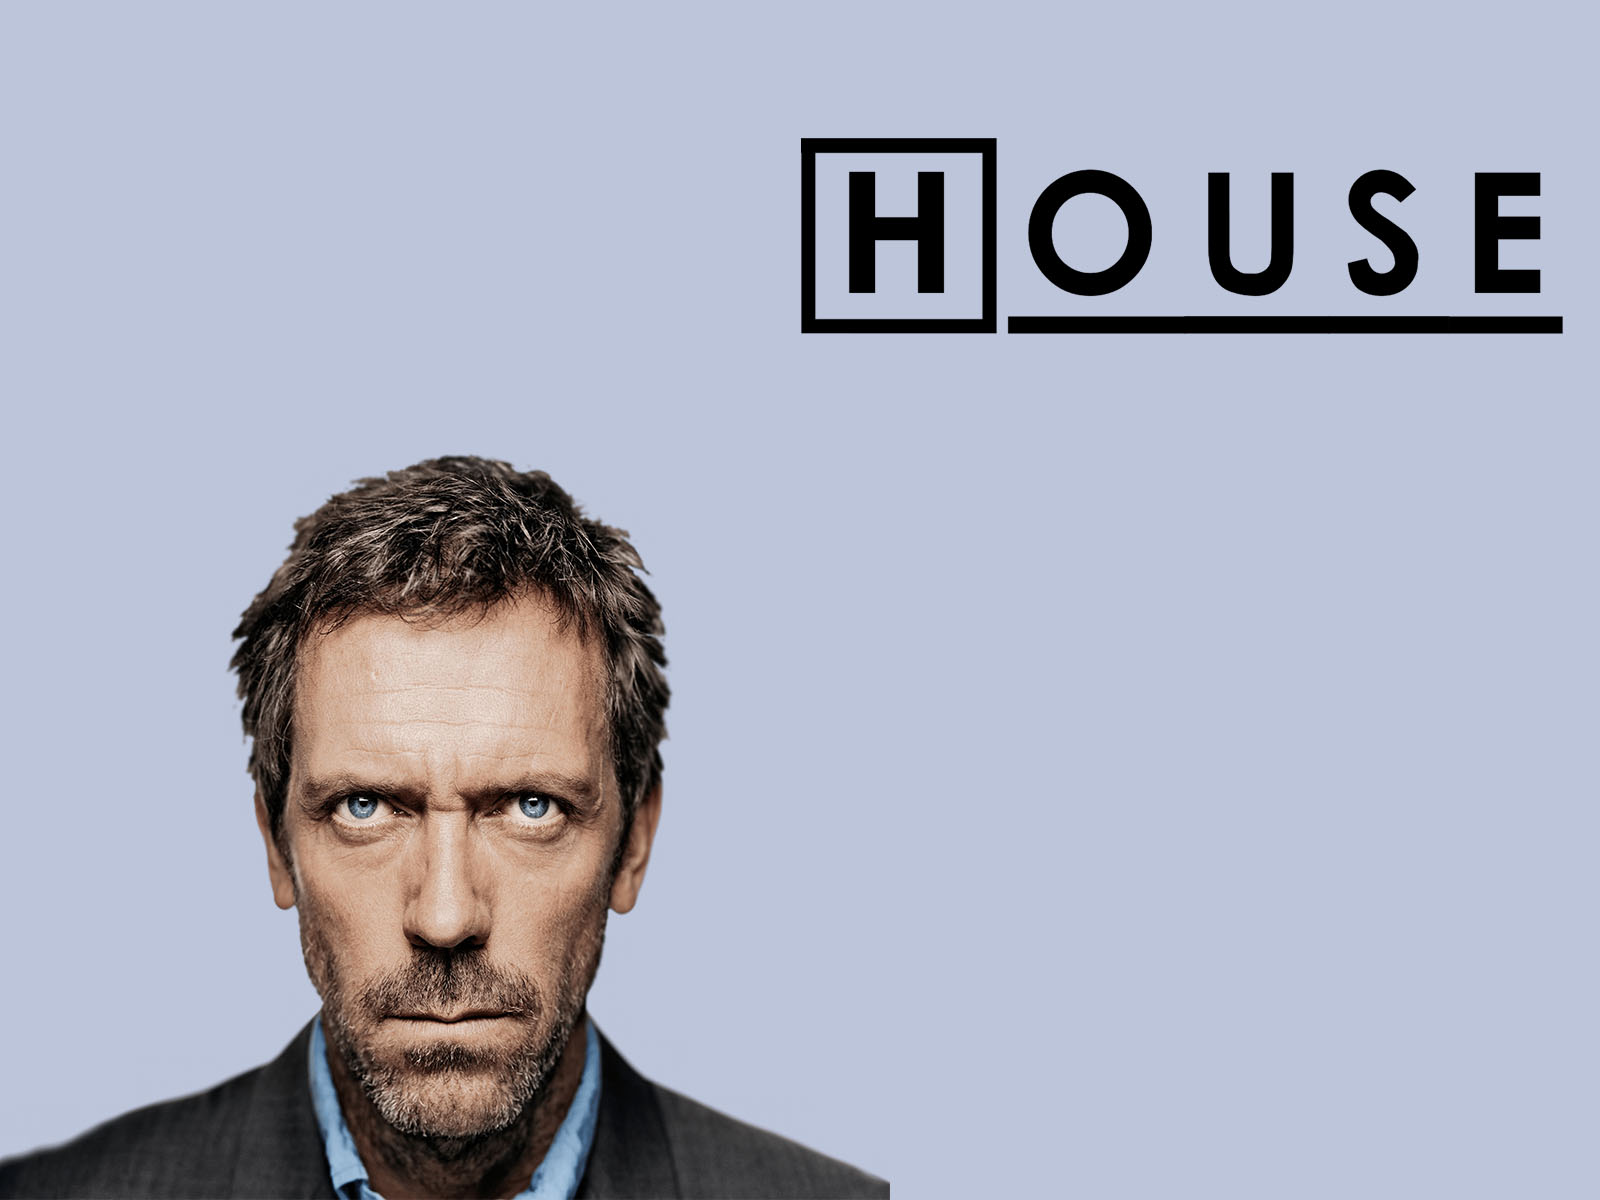 Dr House TV Series